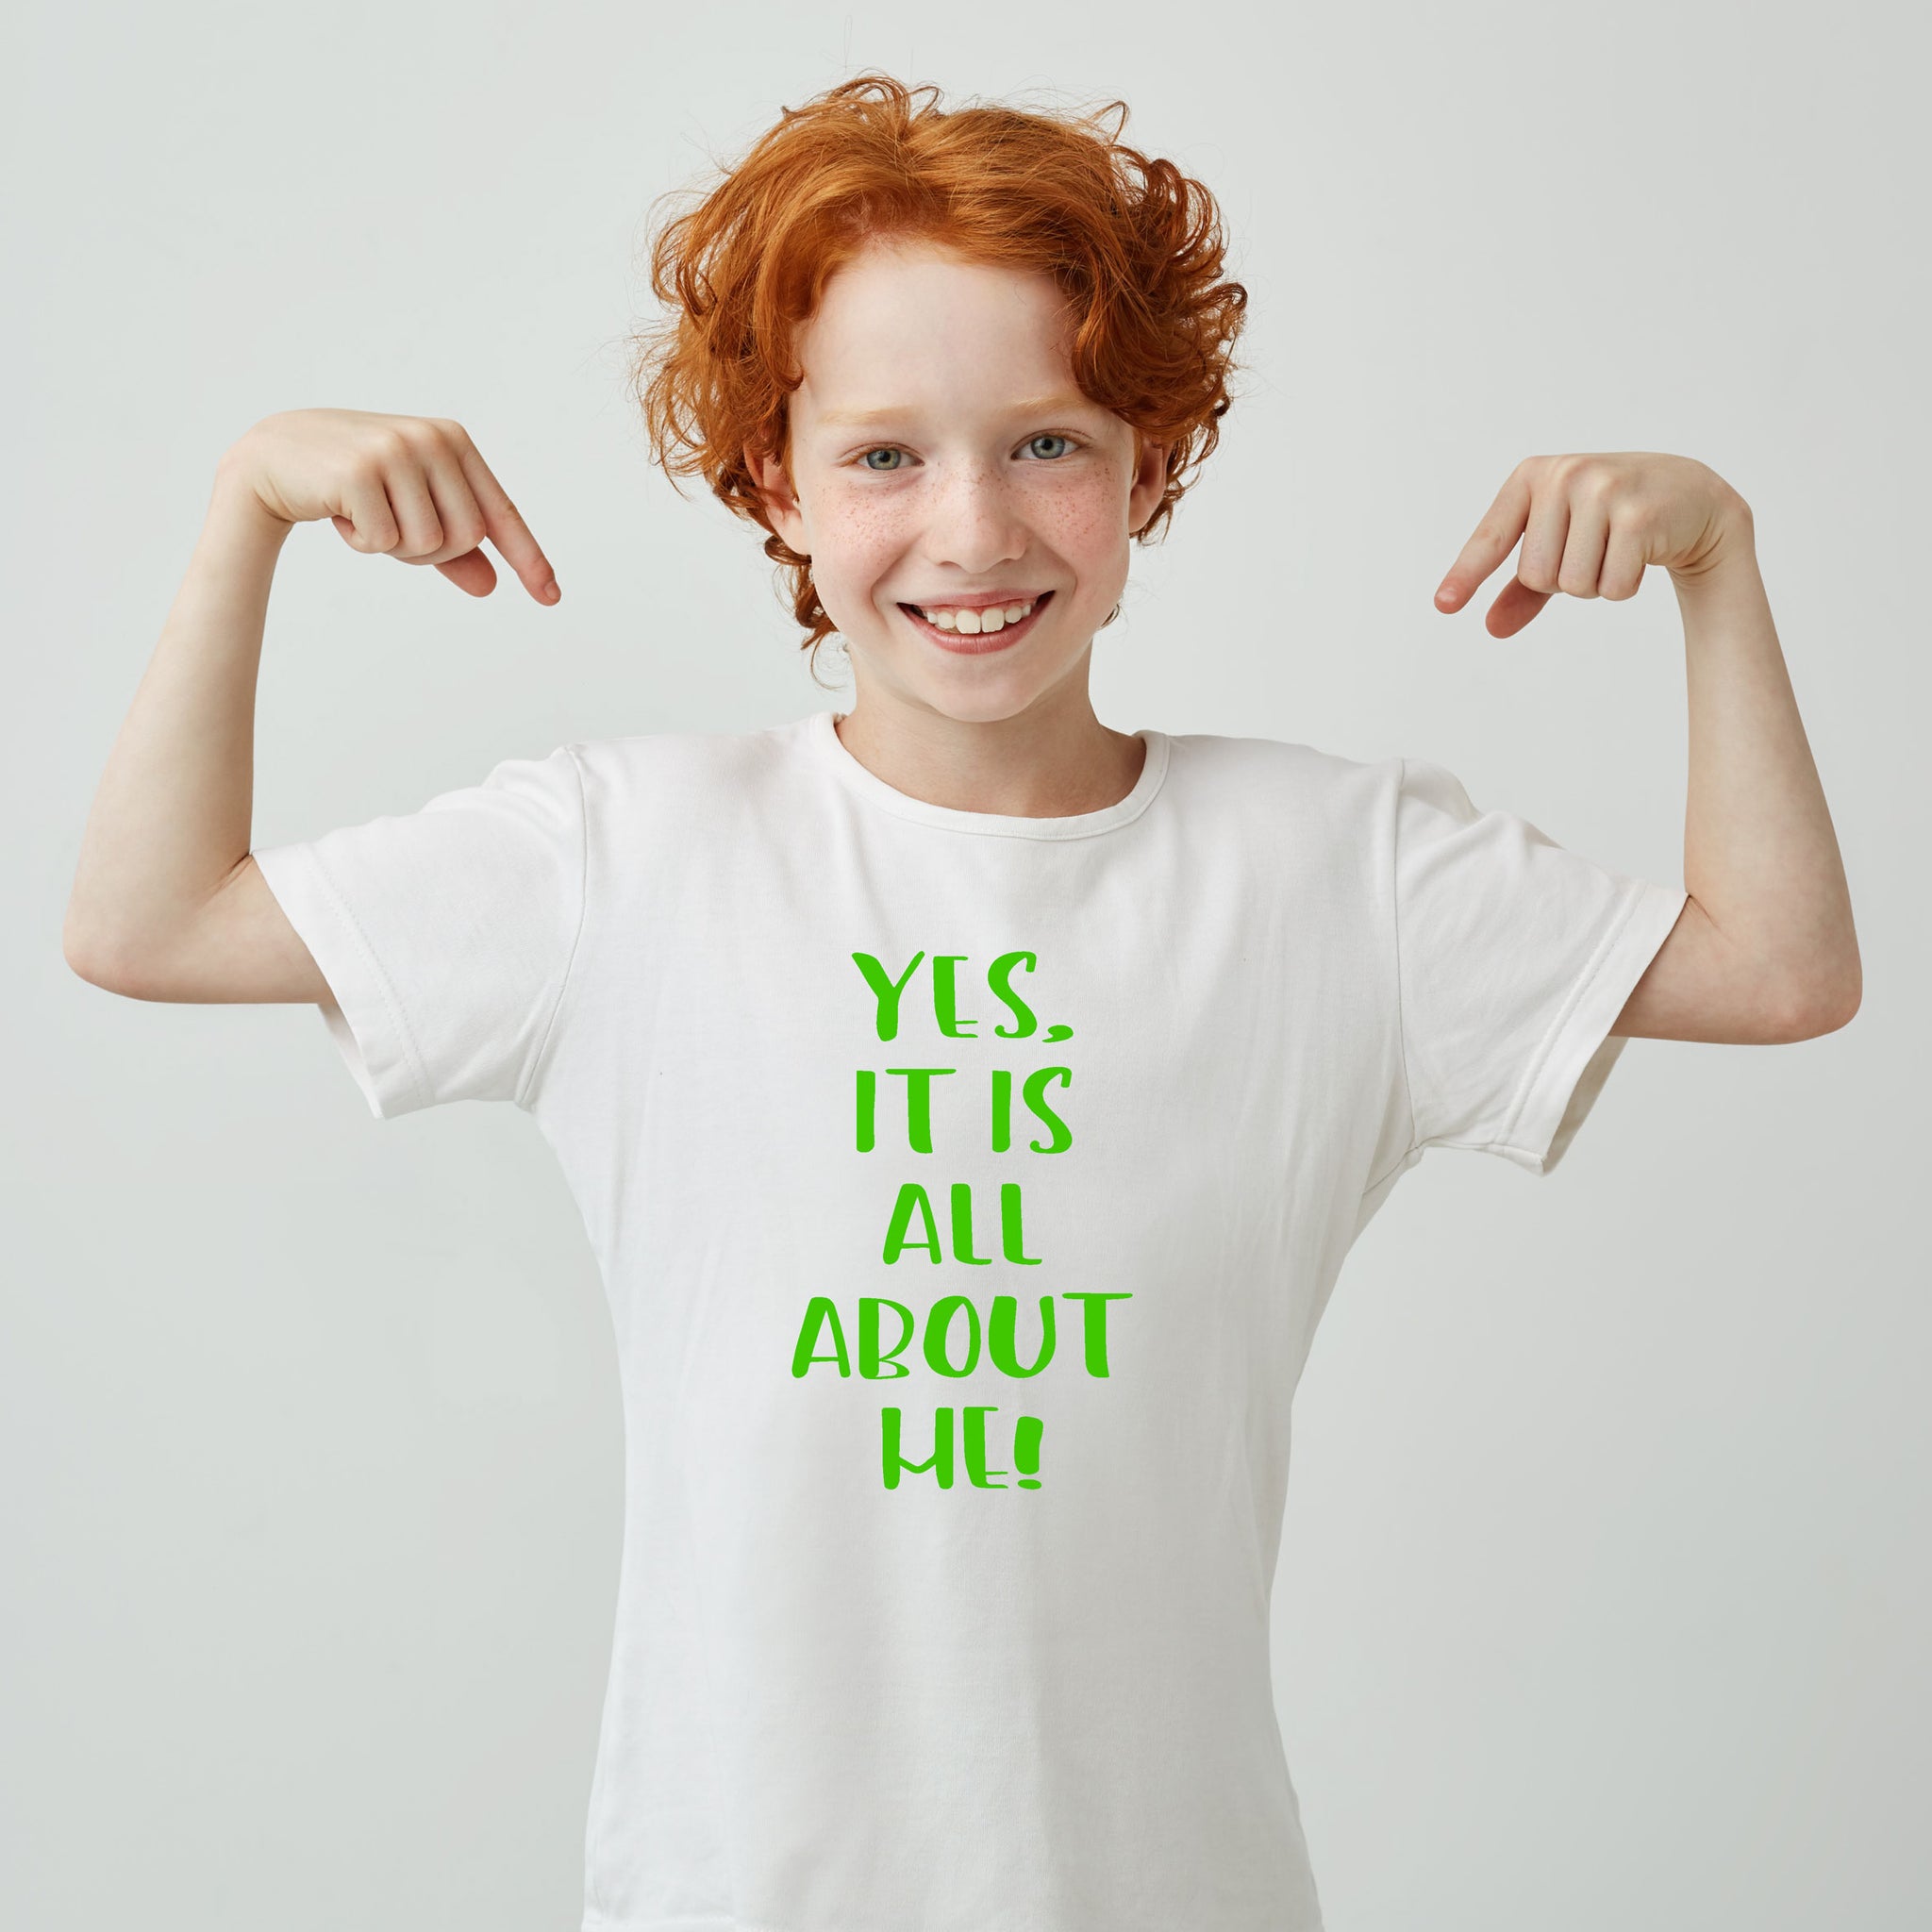 Yes, It Is All About Me! (t-shirt/bodysuit)